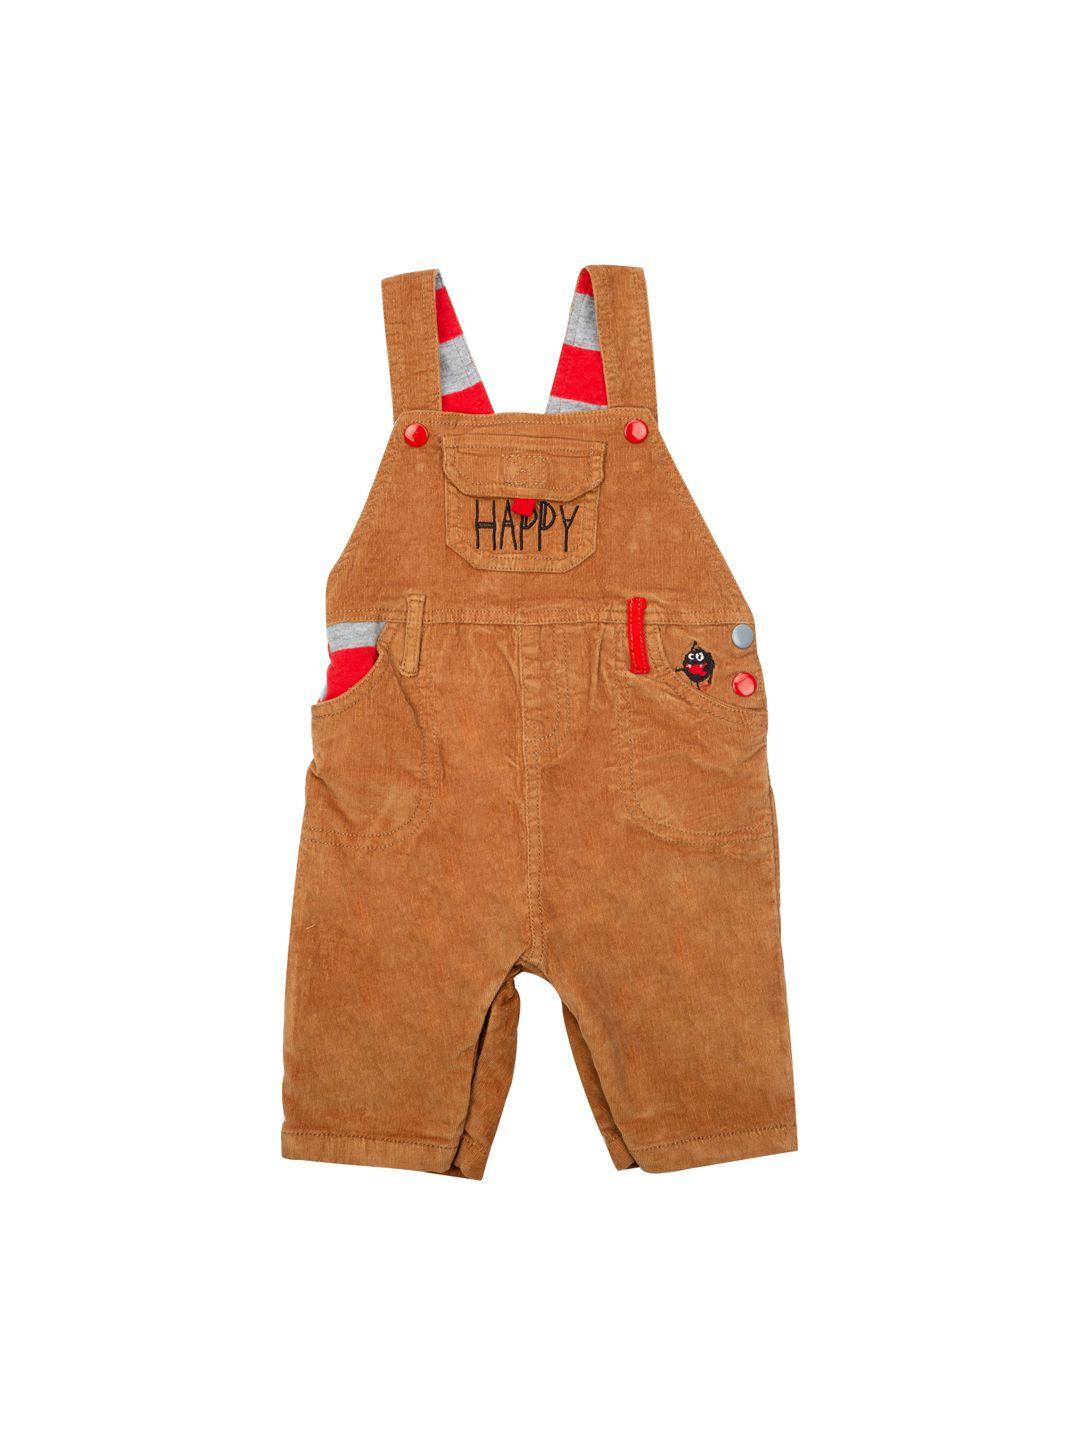 meemee infant boys mustard yellow & red striped dungrees set